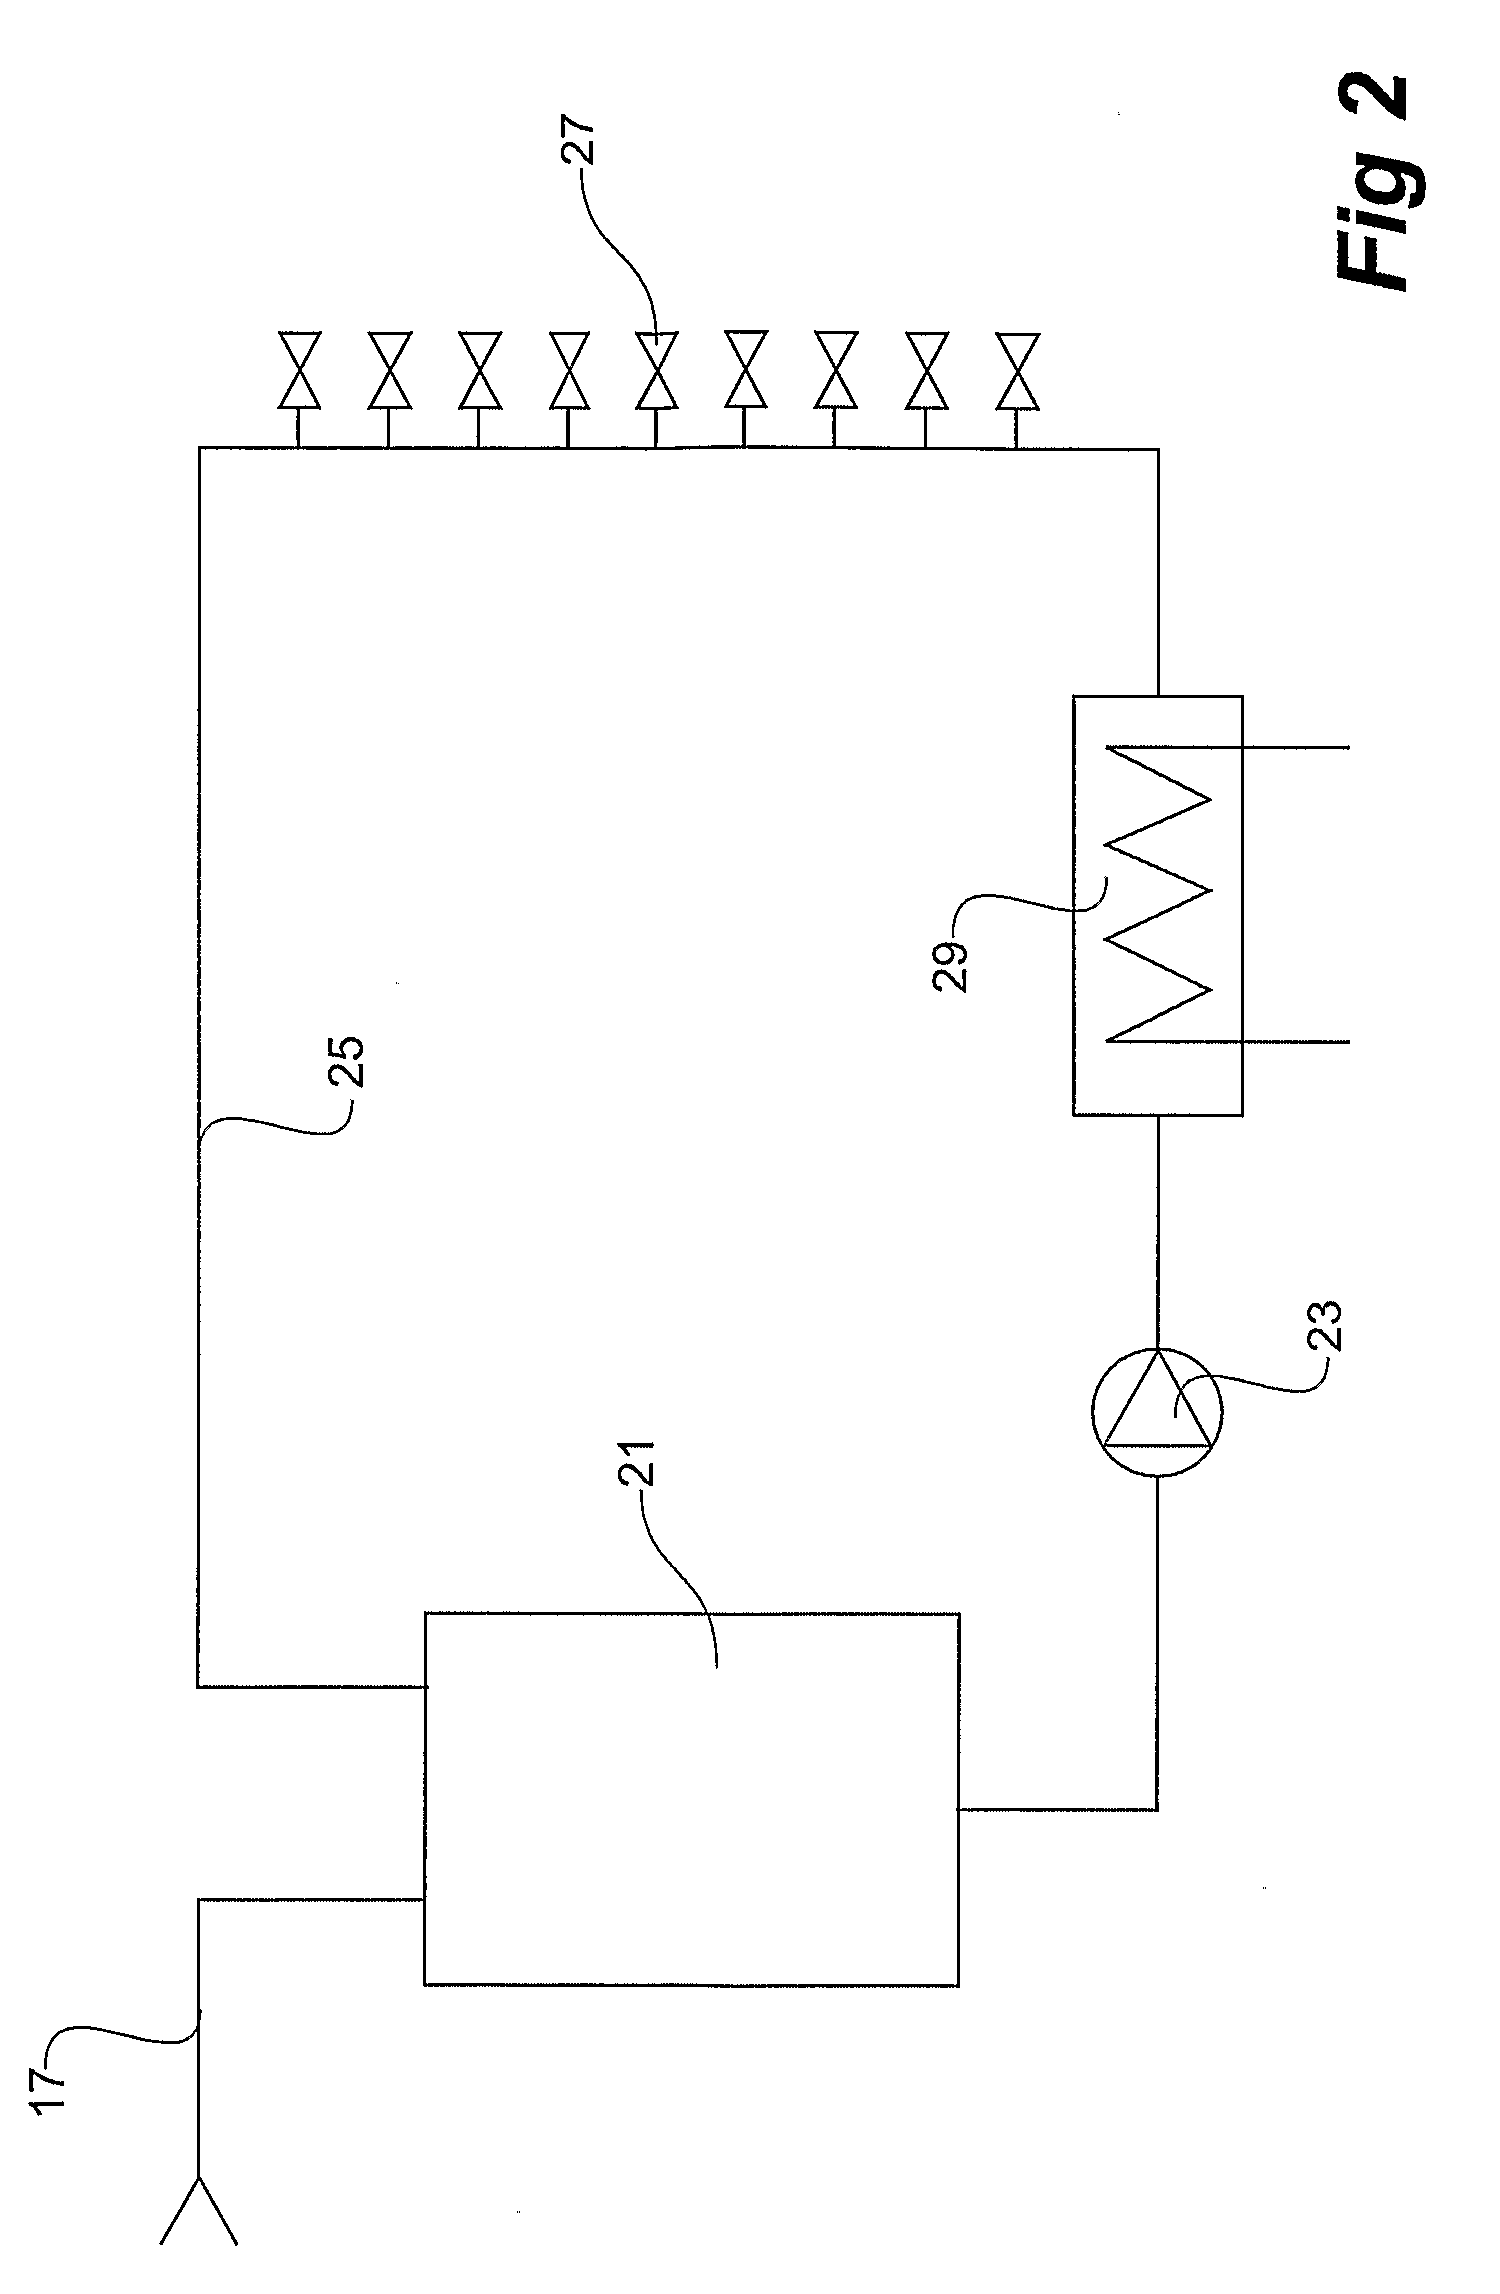 Purified Water Production and Distribution System